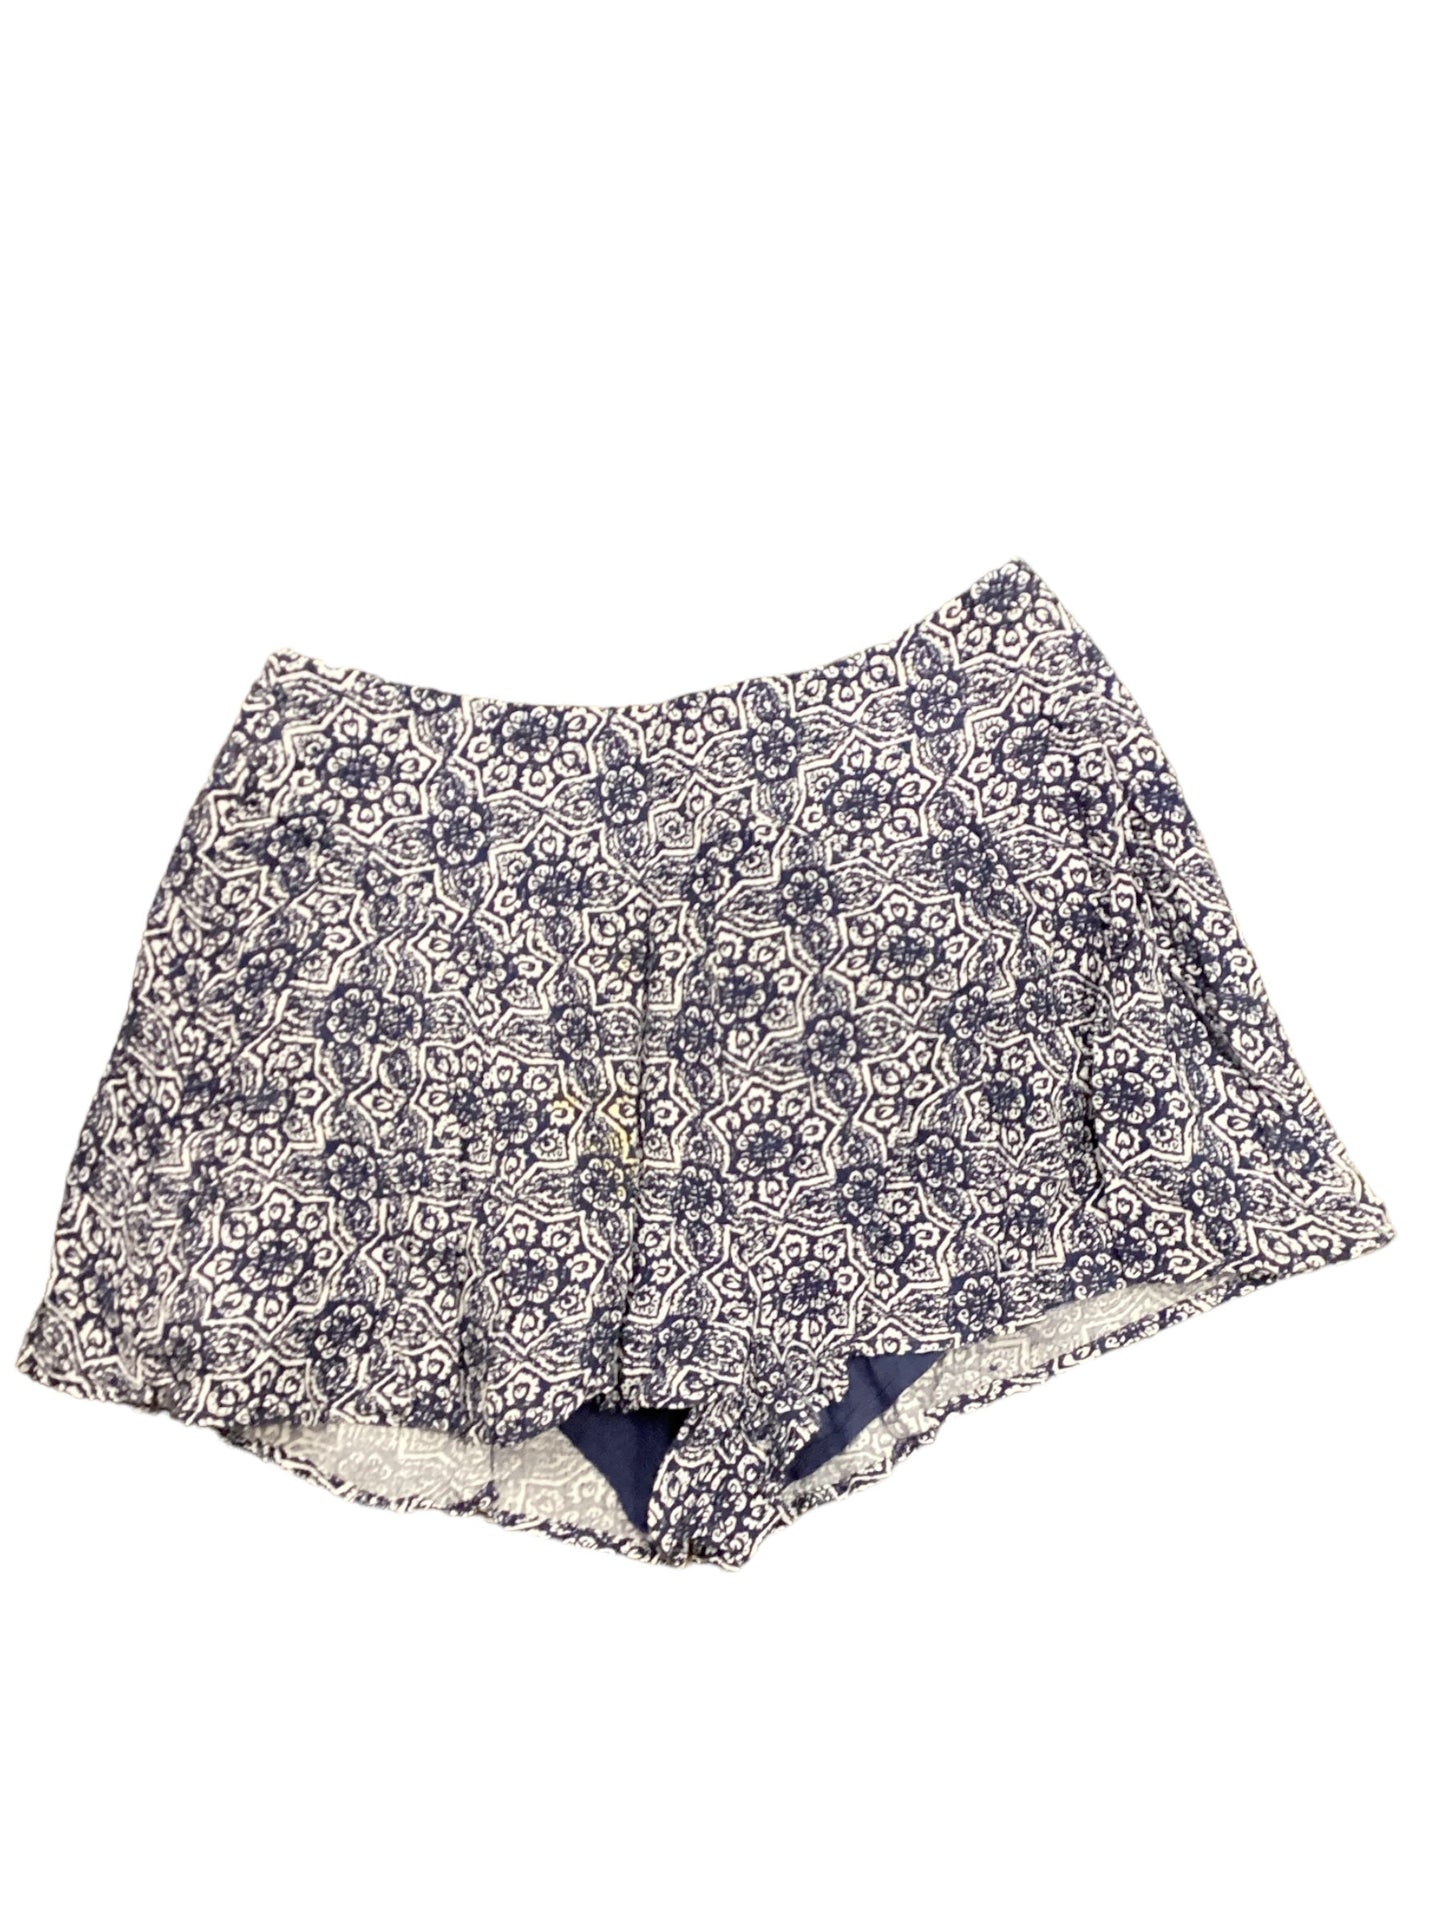 Blue & White Shorts Altard State, Size S